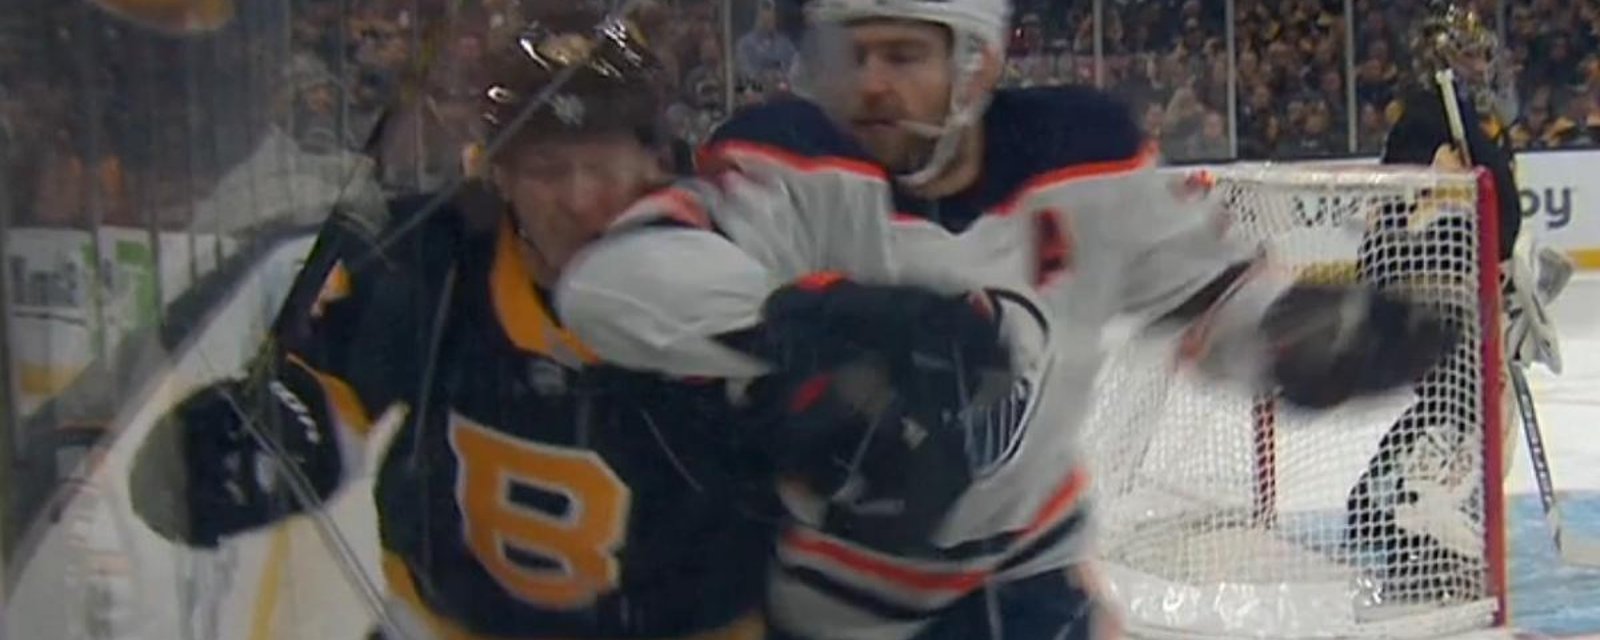 Leon Draisaitl delivers a blatant elbow to the head of Torey Krug.